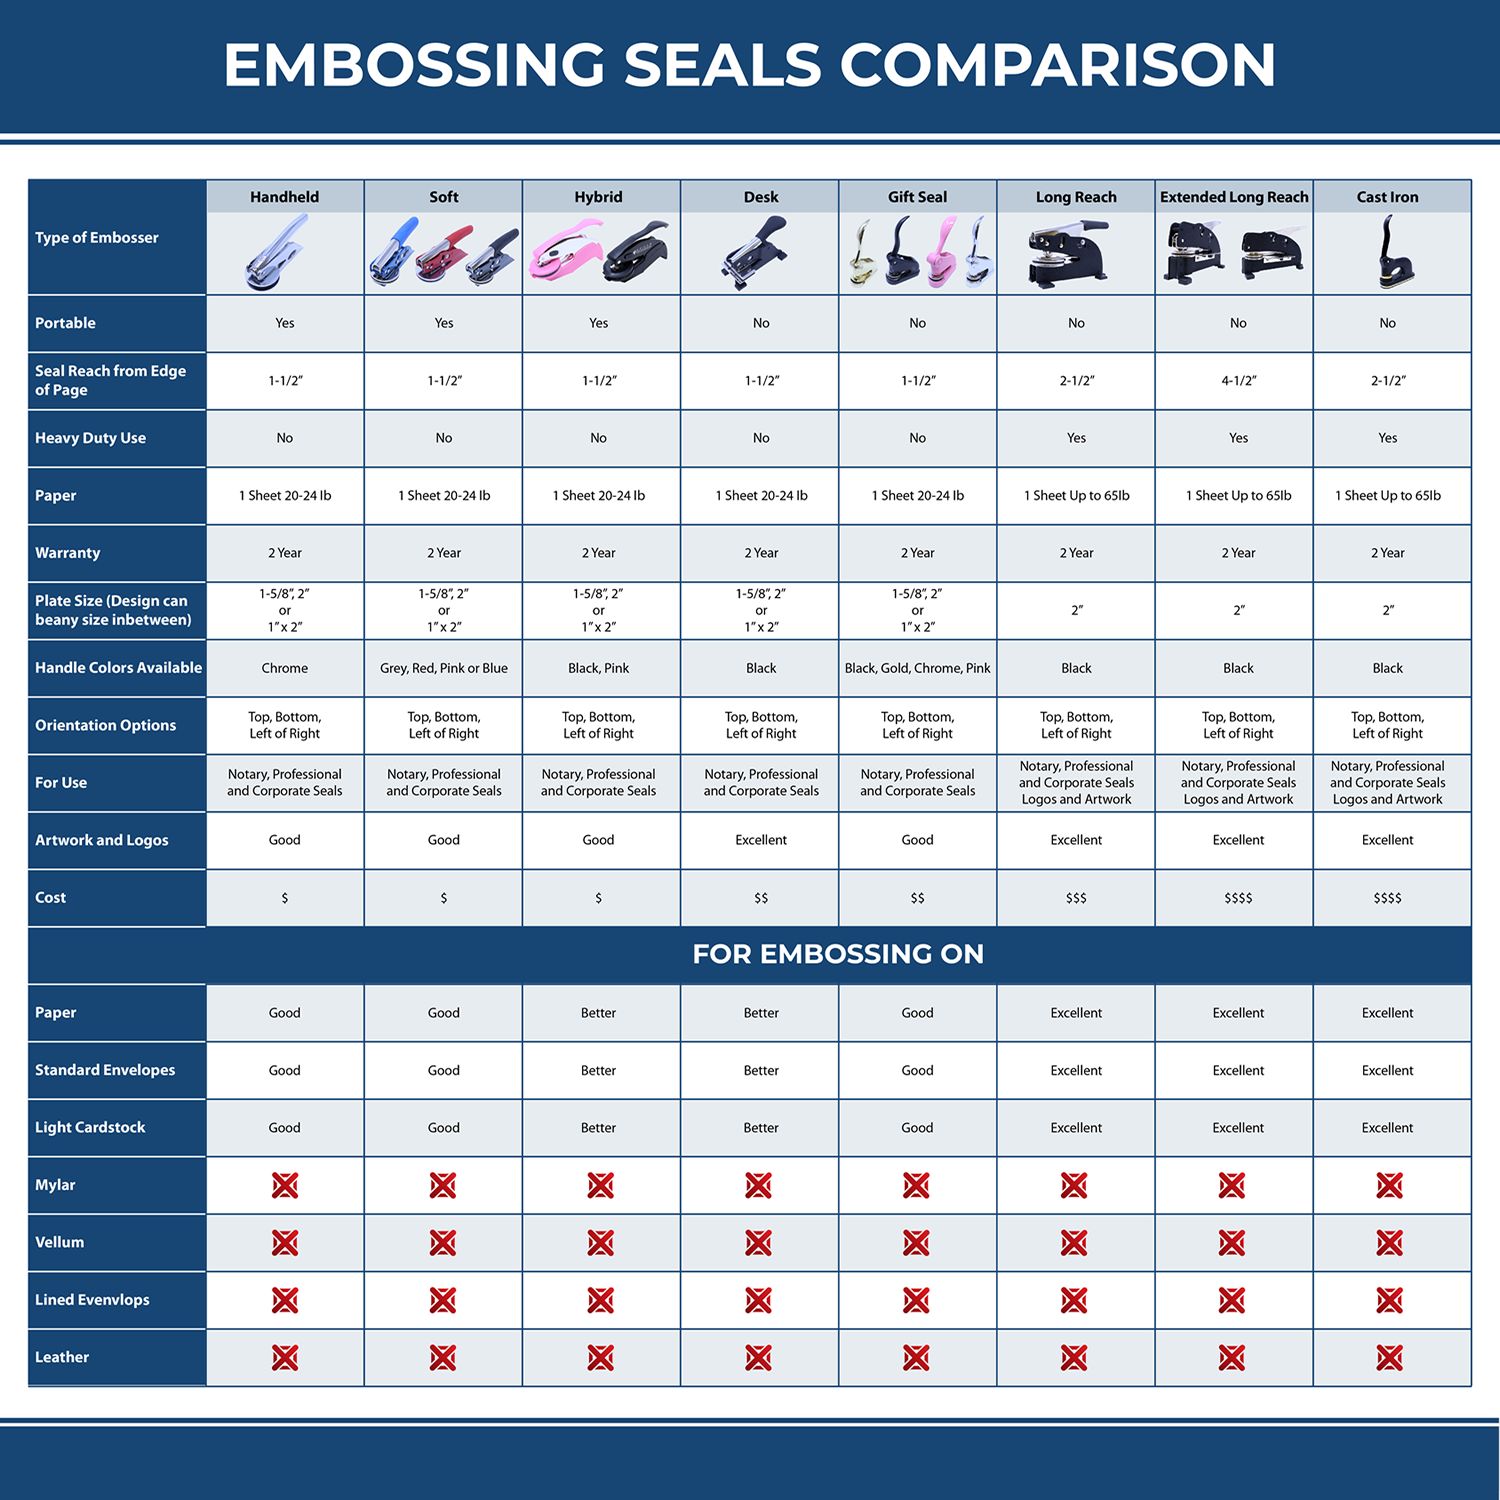 A comparison chart for the different types of mount models available for the Connecticut Desk Landscape Architectural Seal Embosser.